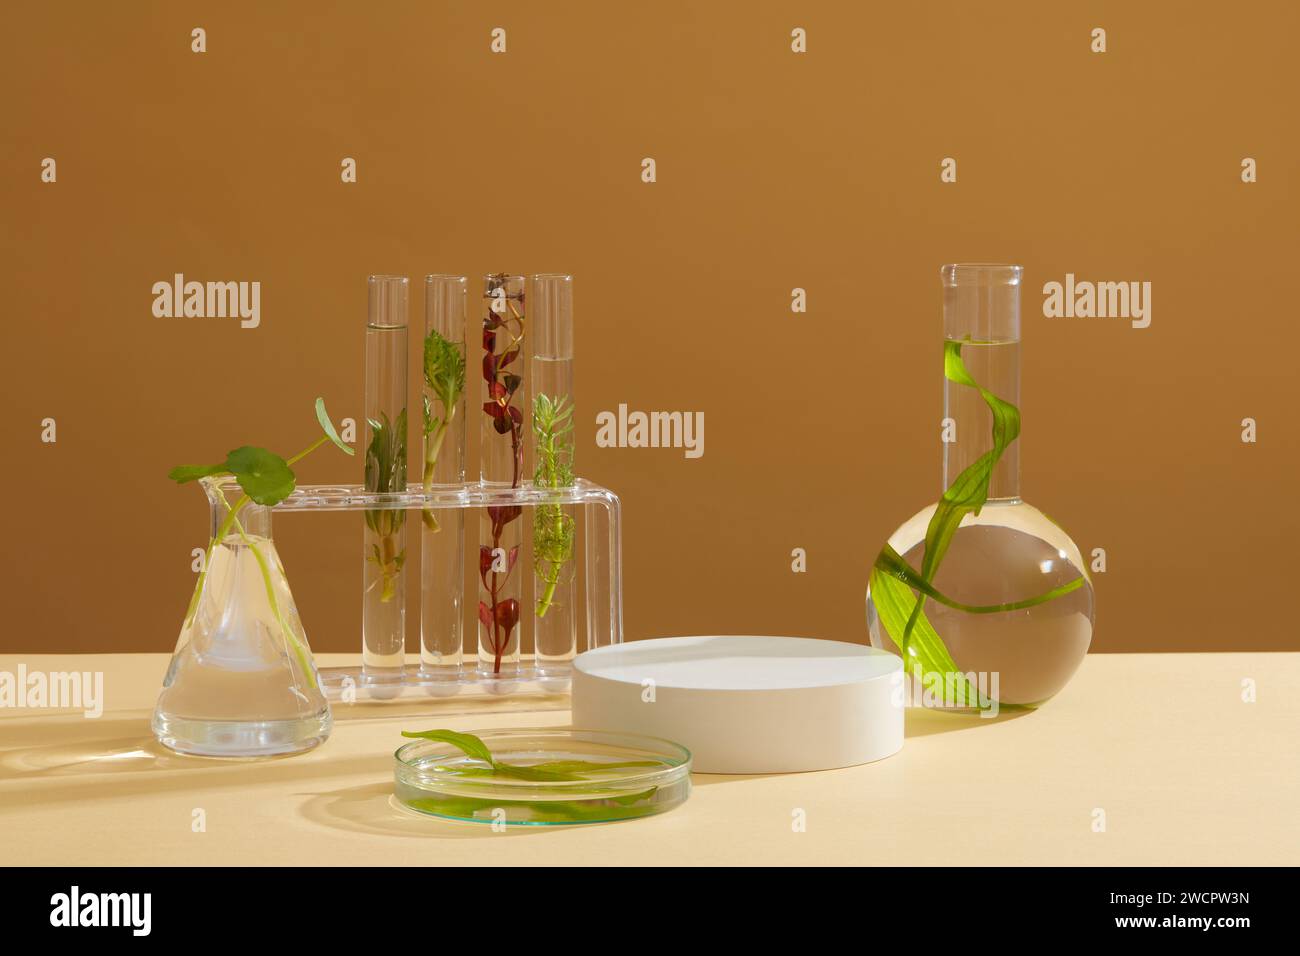 Several types of seaweed are filled in laboratory glassware. Brown background featured a round podium. Seaweed has anti-aging and anti-inflammatory be Stock Photo